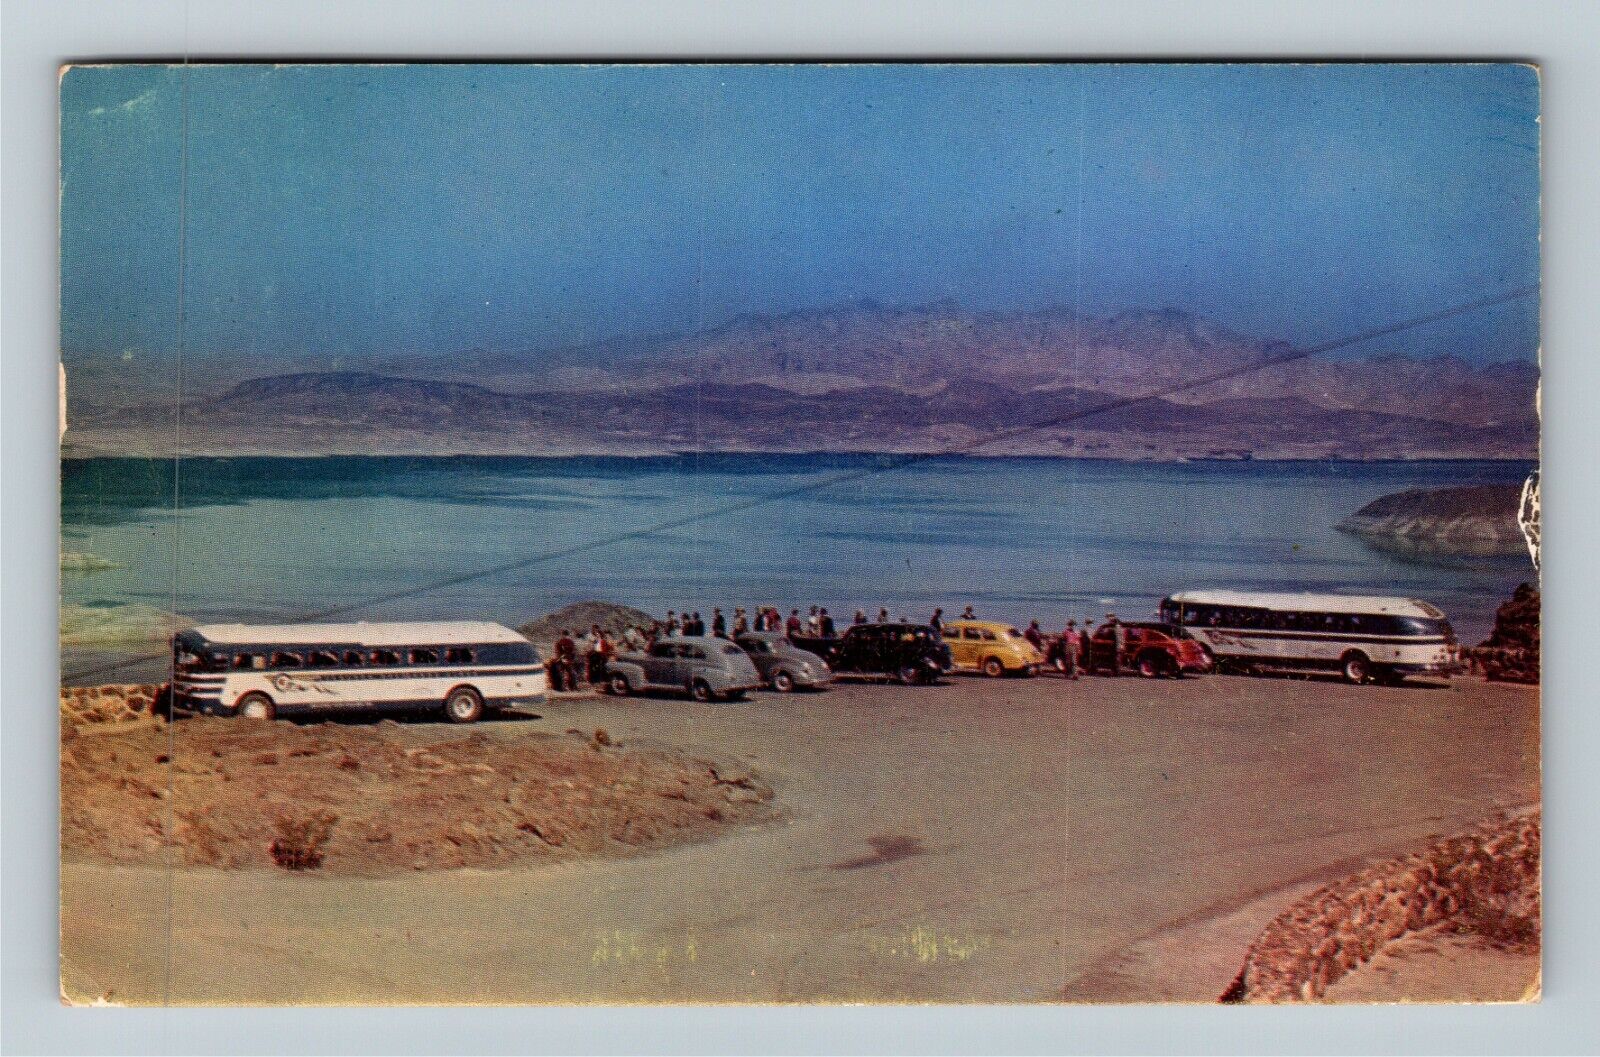 Hoover Dam NV-Nevada, Lakeview Point Tourist Bus Lake Mead Chrome c1952 Postcard